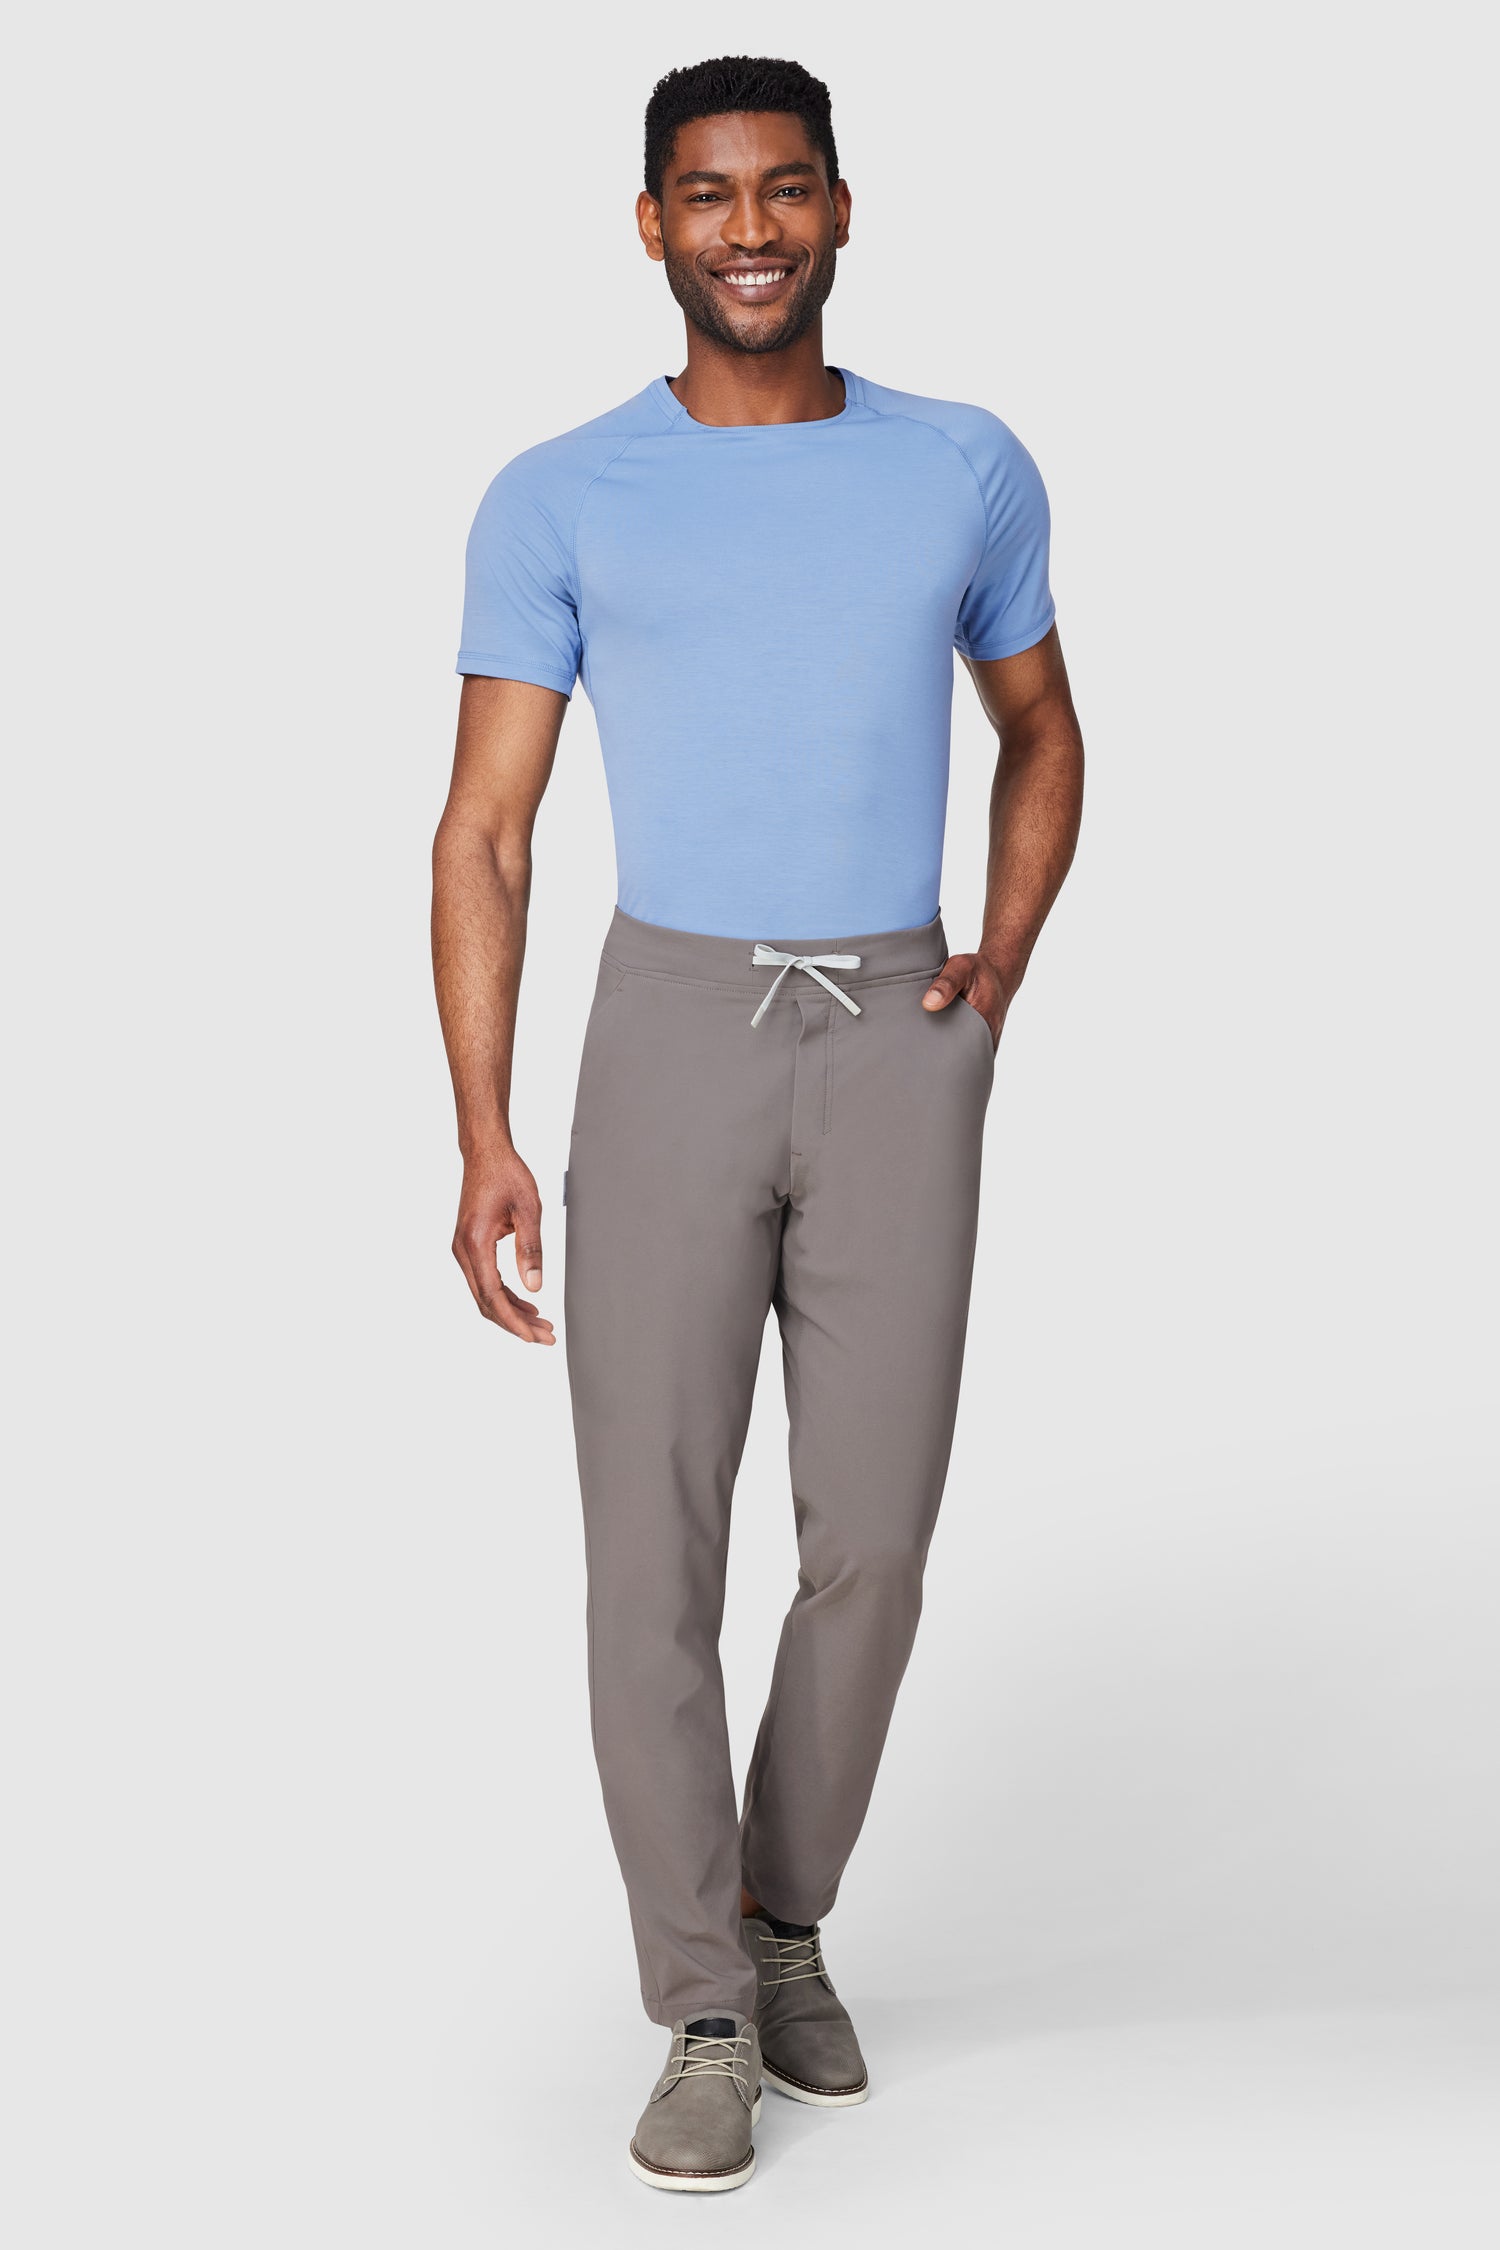 Friday FWD Men's Stretch Commuter Pant - FRIDAYFWD - KEYLOOK - 10